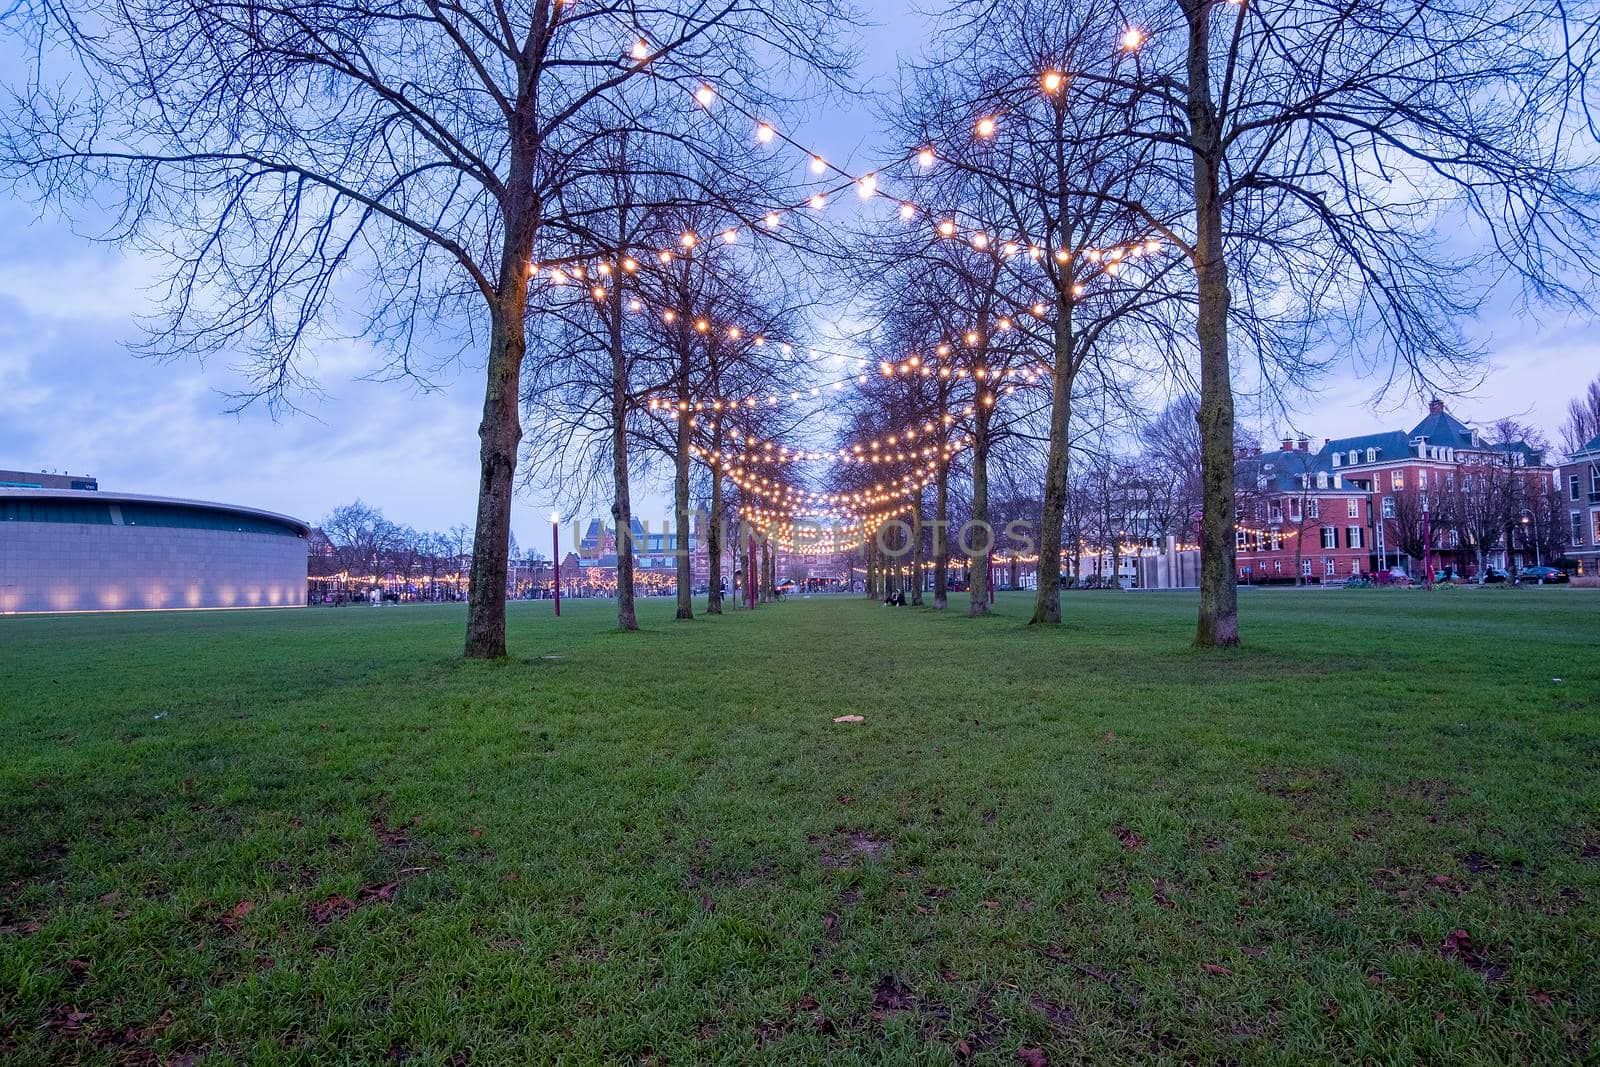 Christmas decoration at the Museumplein in Amsterdam the Neetherlands at twilight